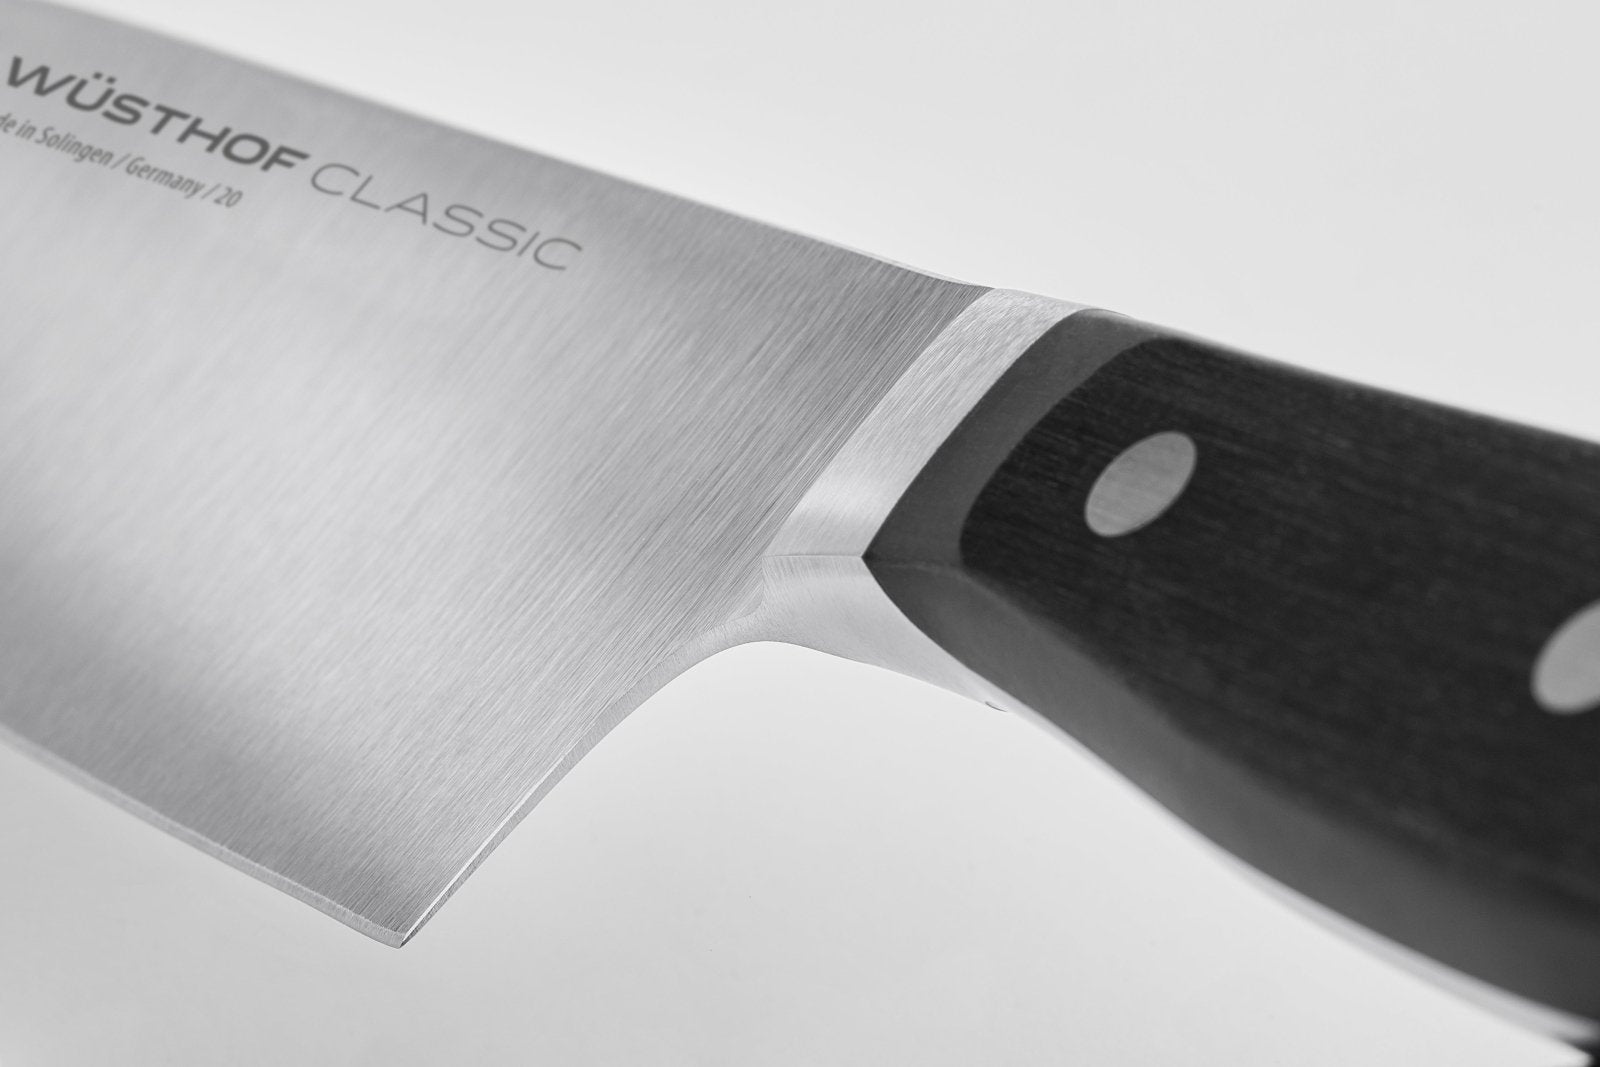 Wusthof Classic 9cm Half Bolster Vegetable/Paring Knife - 1040130409 - The Cotswold Knife Company